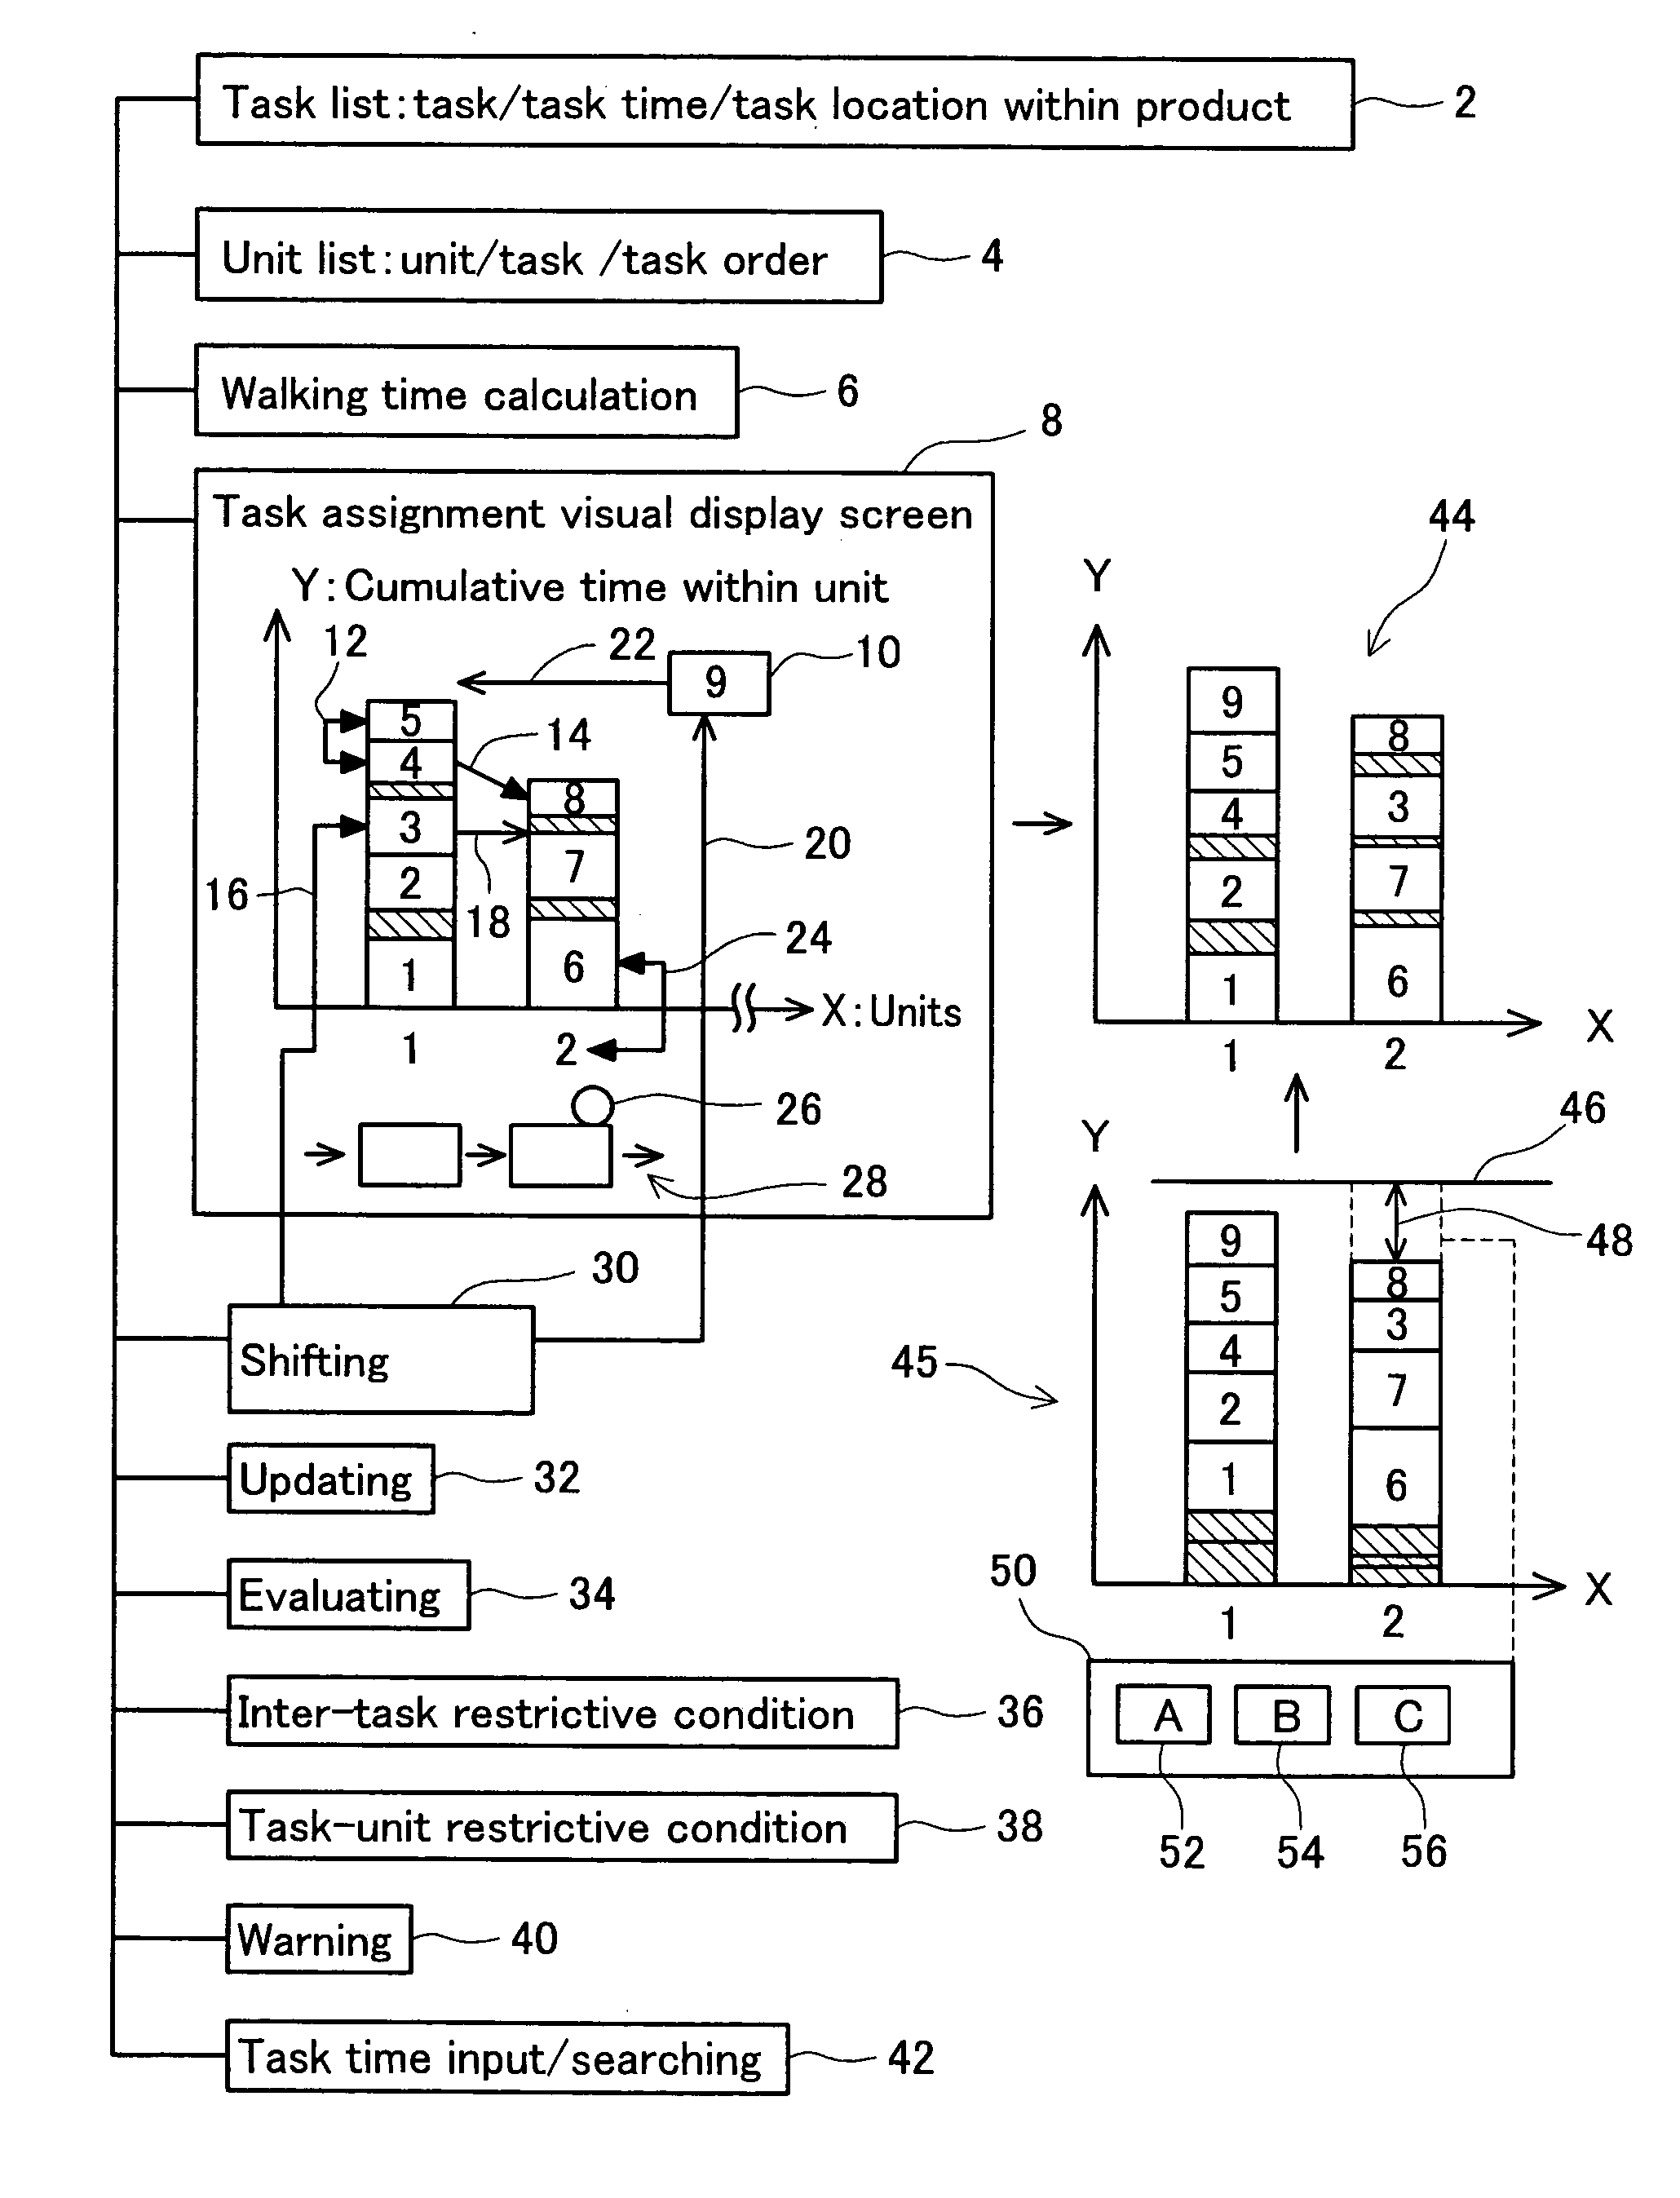 System for assisting planning of work allocation utilizing visual display screen